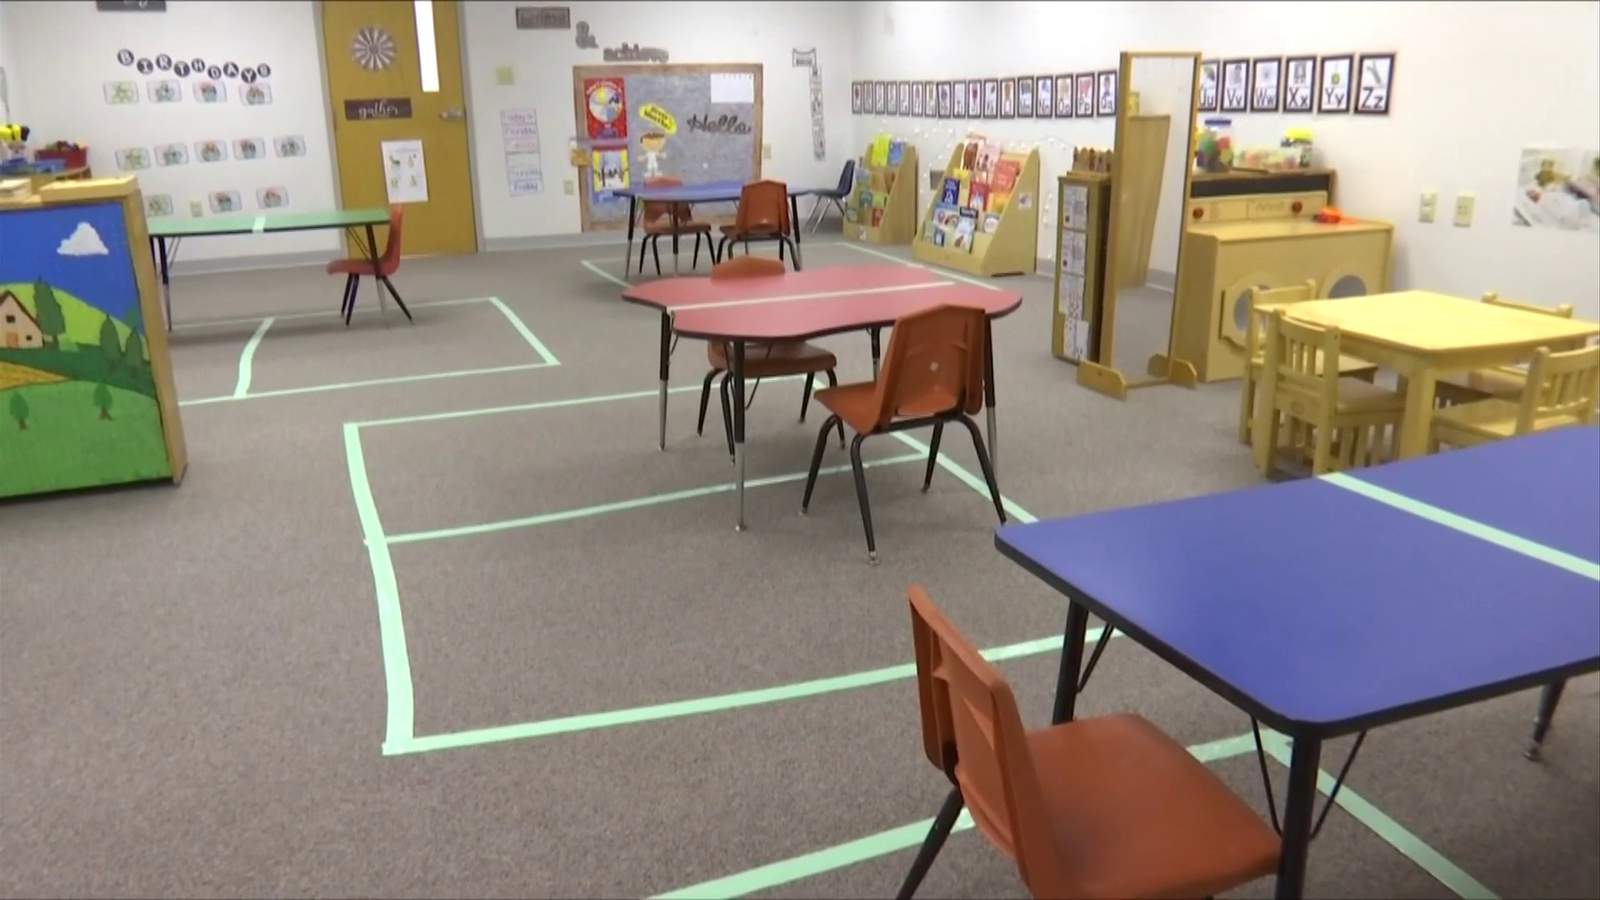 New childcare facility opening in Campbell County ‘daycare desert’